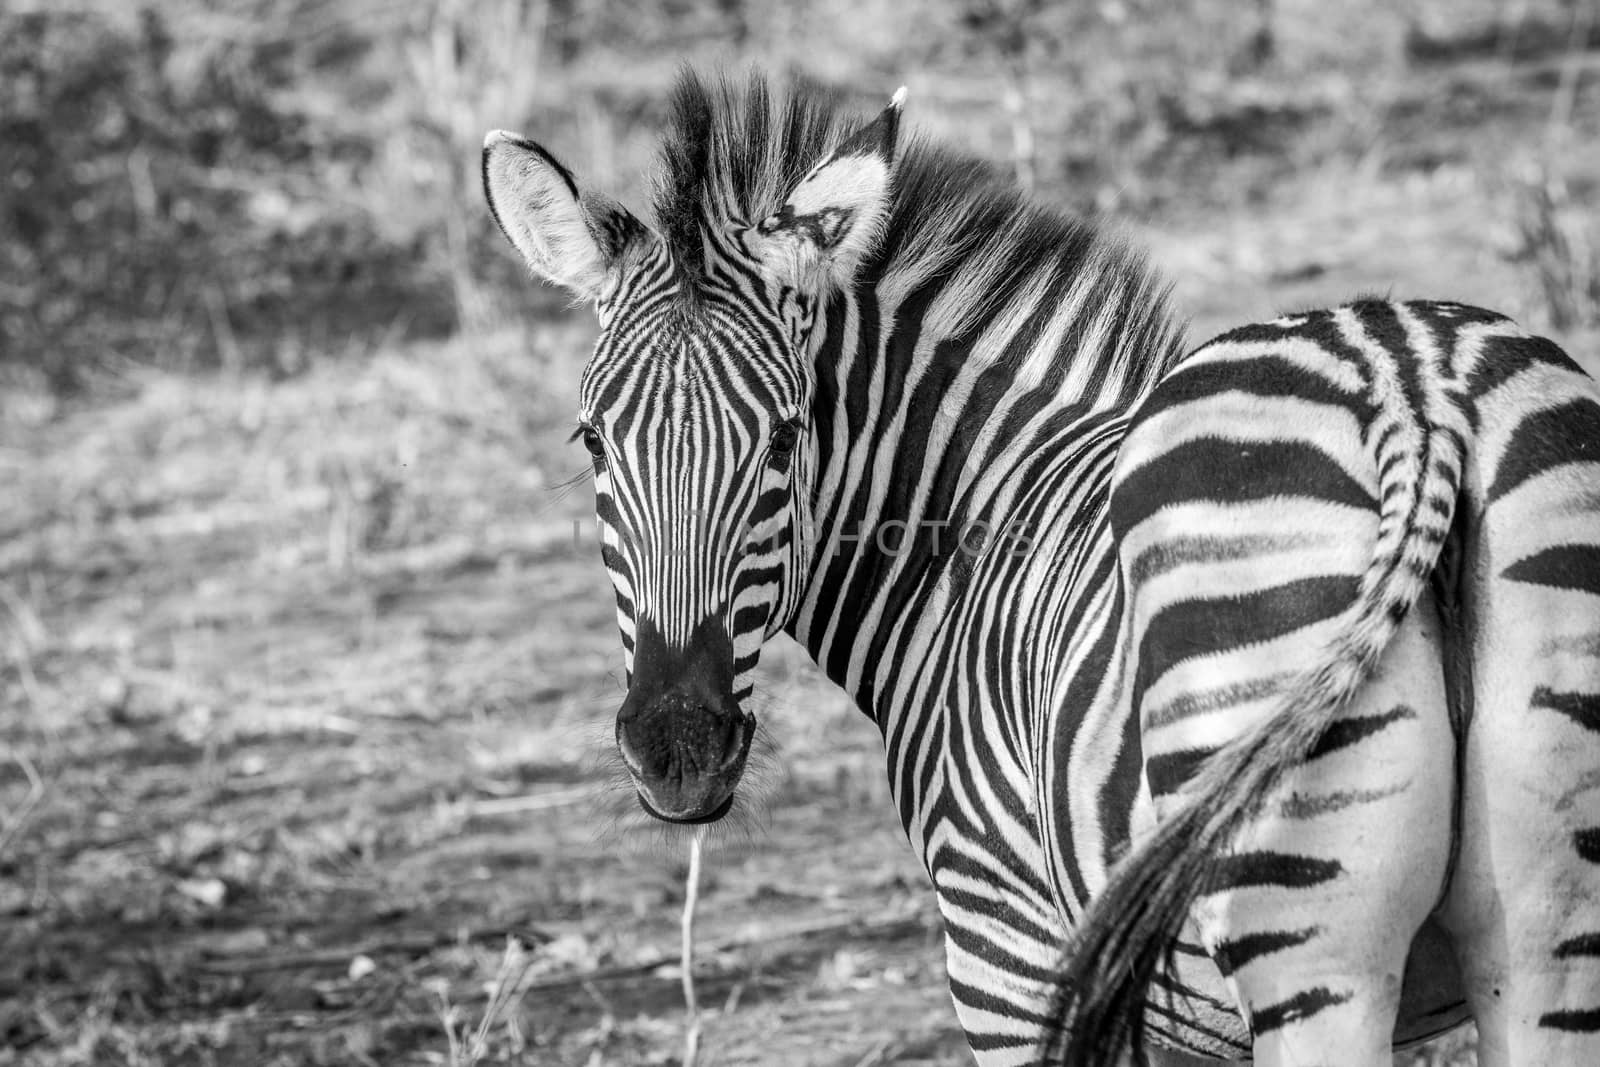 A starring Zebra in black and white in the Kruger National Park, South Africa.